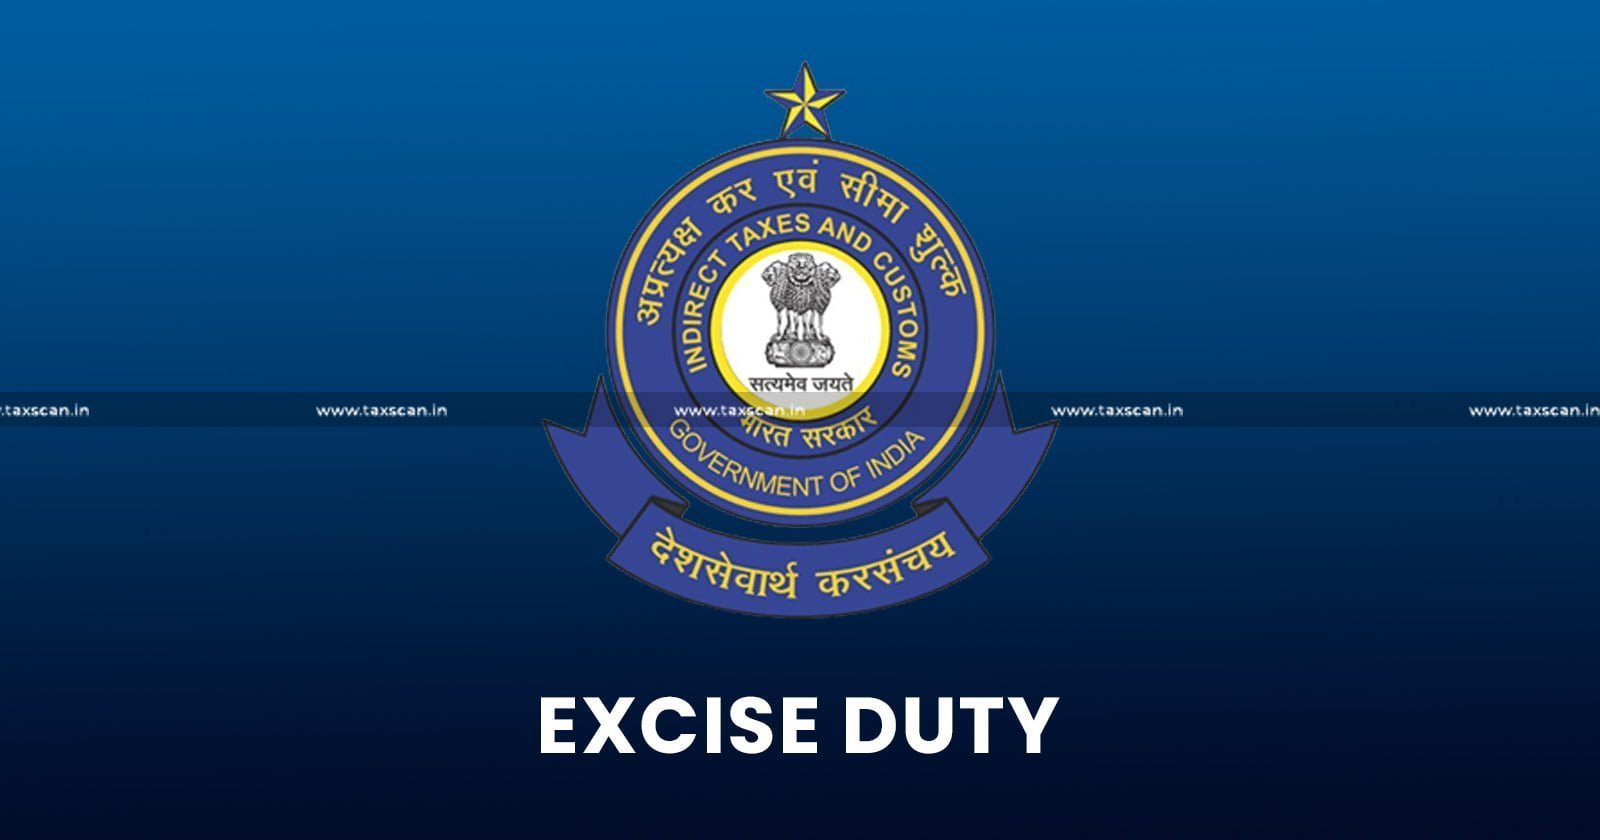 Excise Duty Demand - Third Party Inspection Charges - Inspection Charges - Transaction Value of Goods - Value of Goods - Excise Duty - CESTAT - taxscan